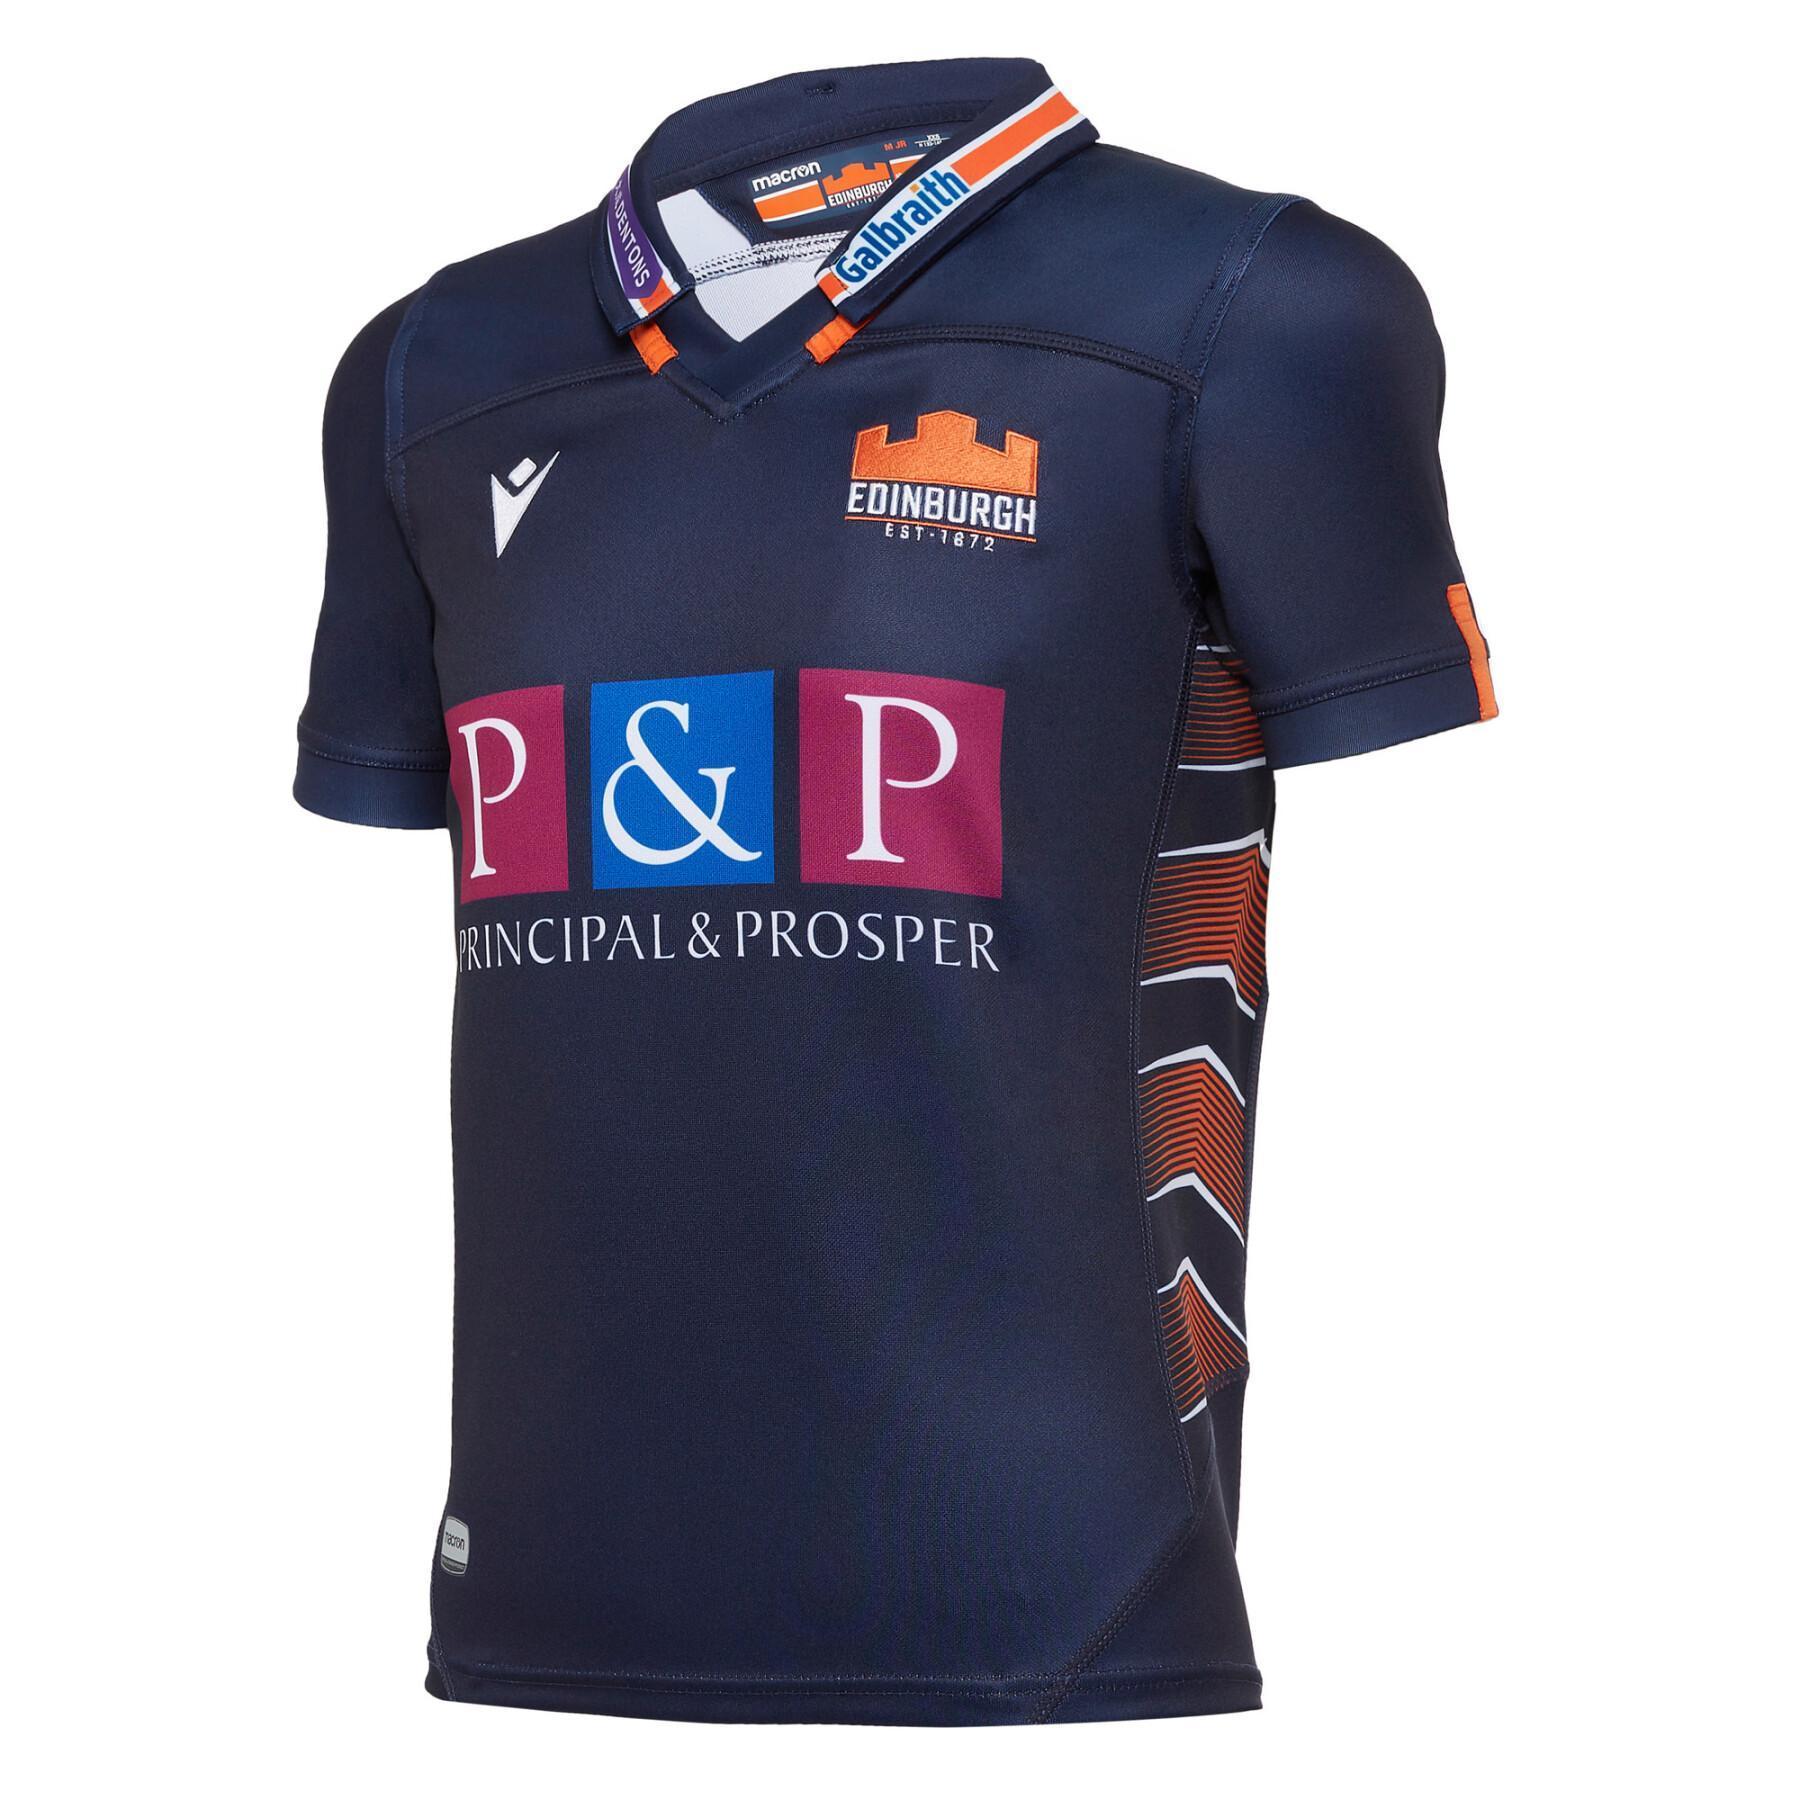 Children's home jersey Édimbourg Rugby 2020